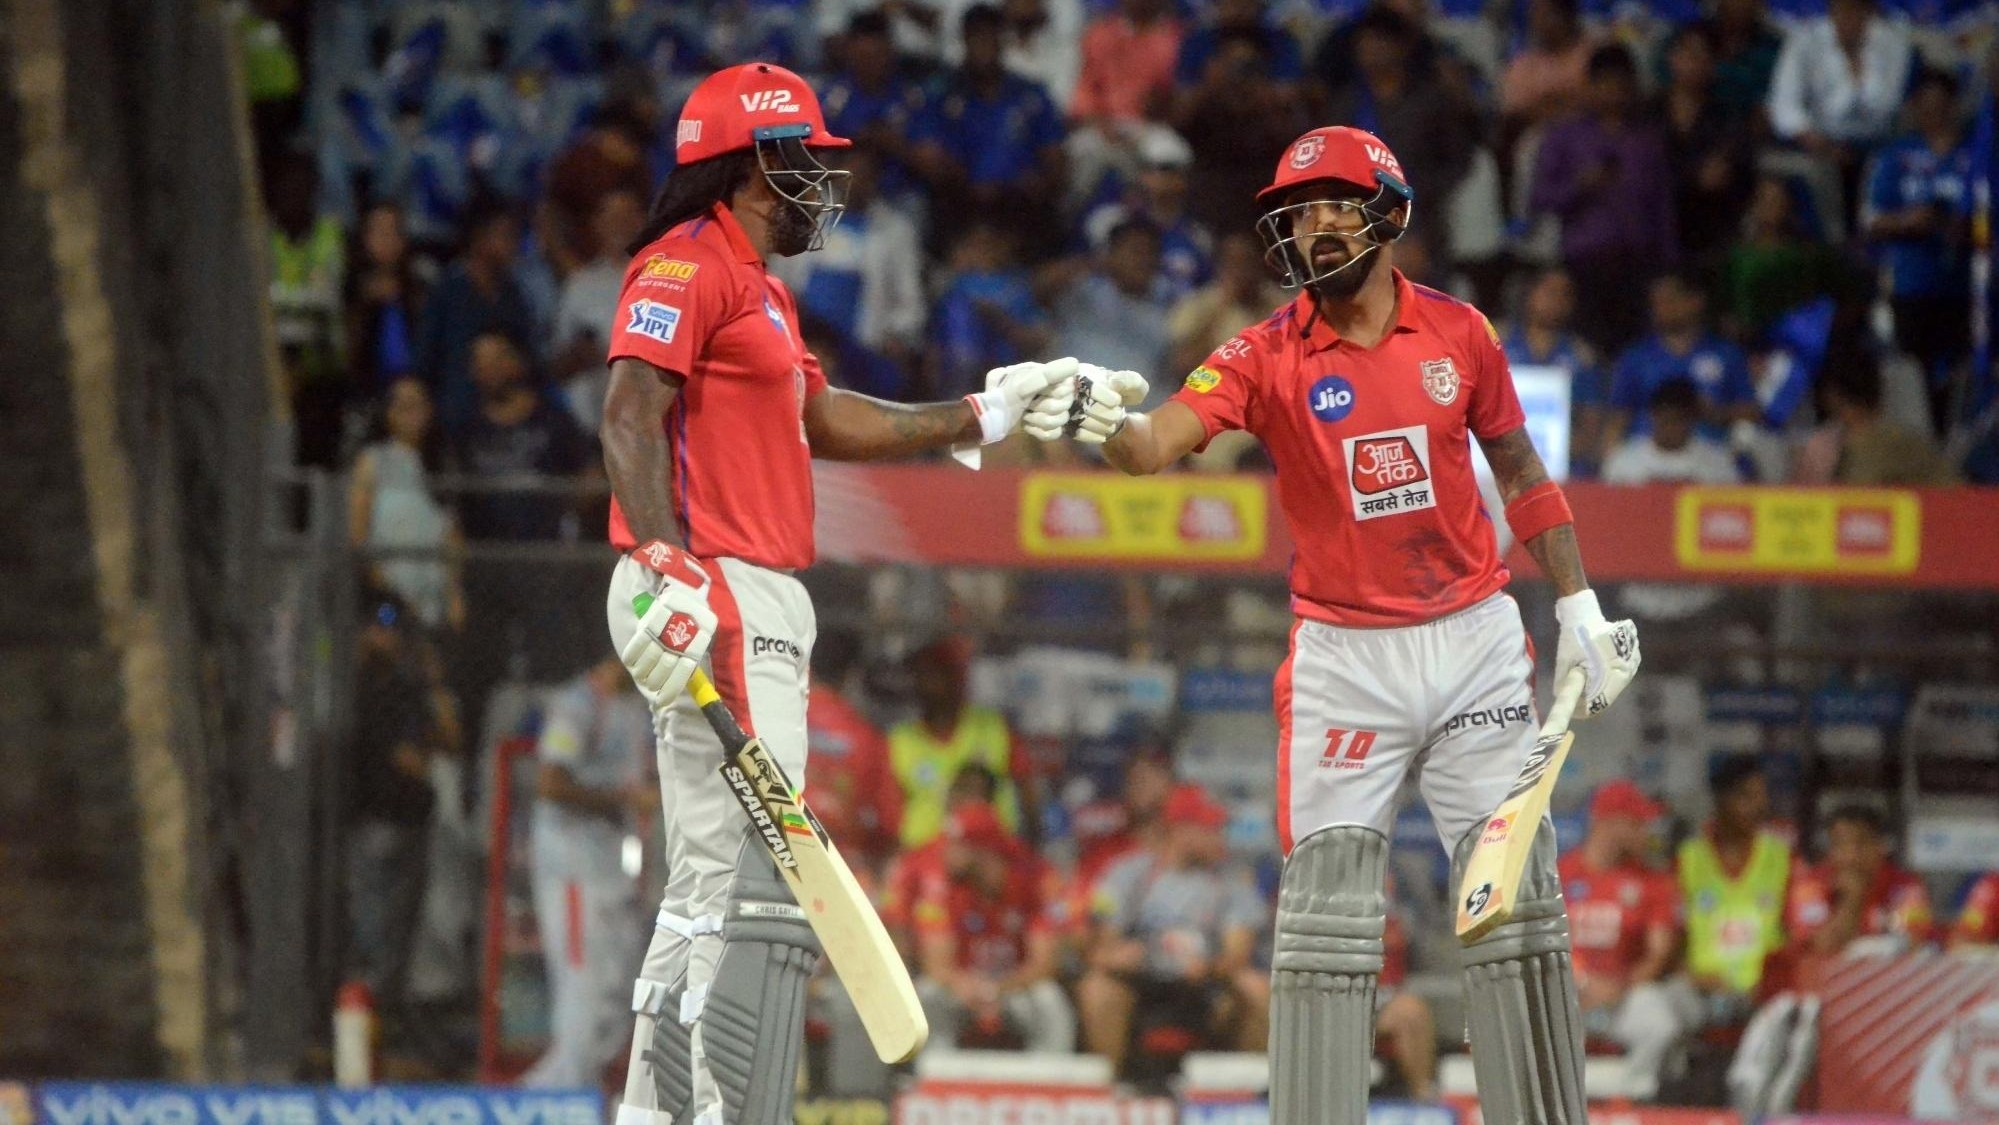 IPL 2020: Chris Gayle striking the ball well, will have a huge role to play for KXIP, says KL Rahul